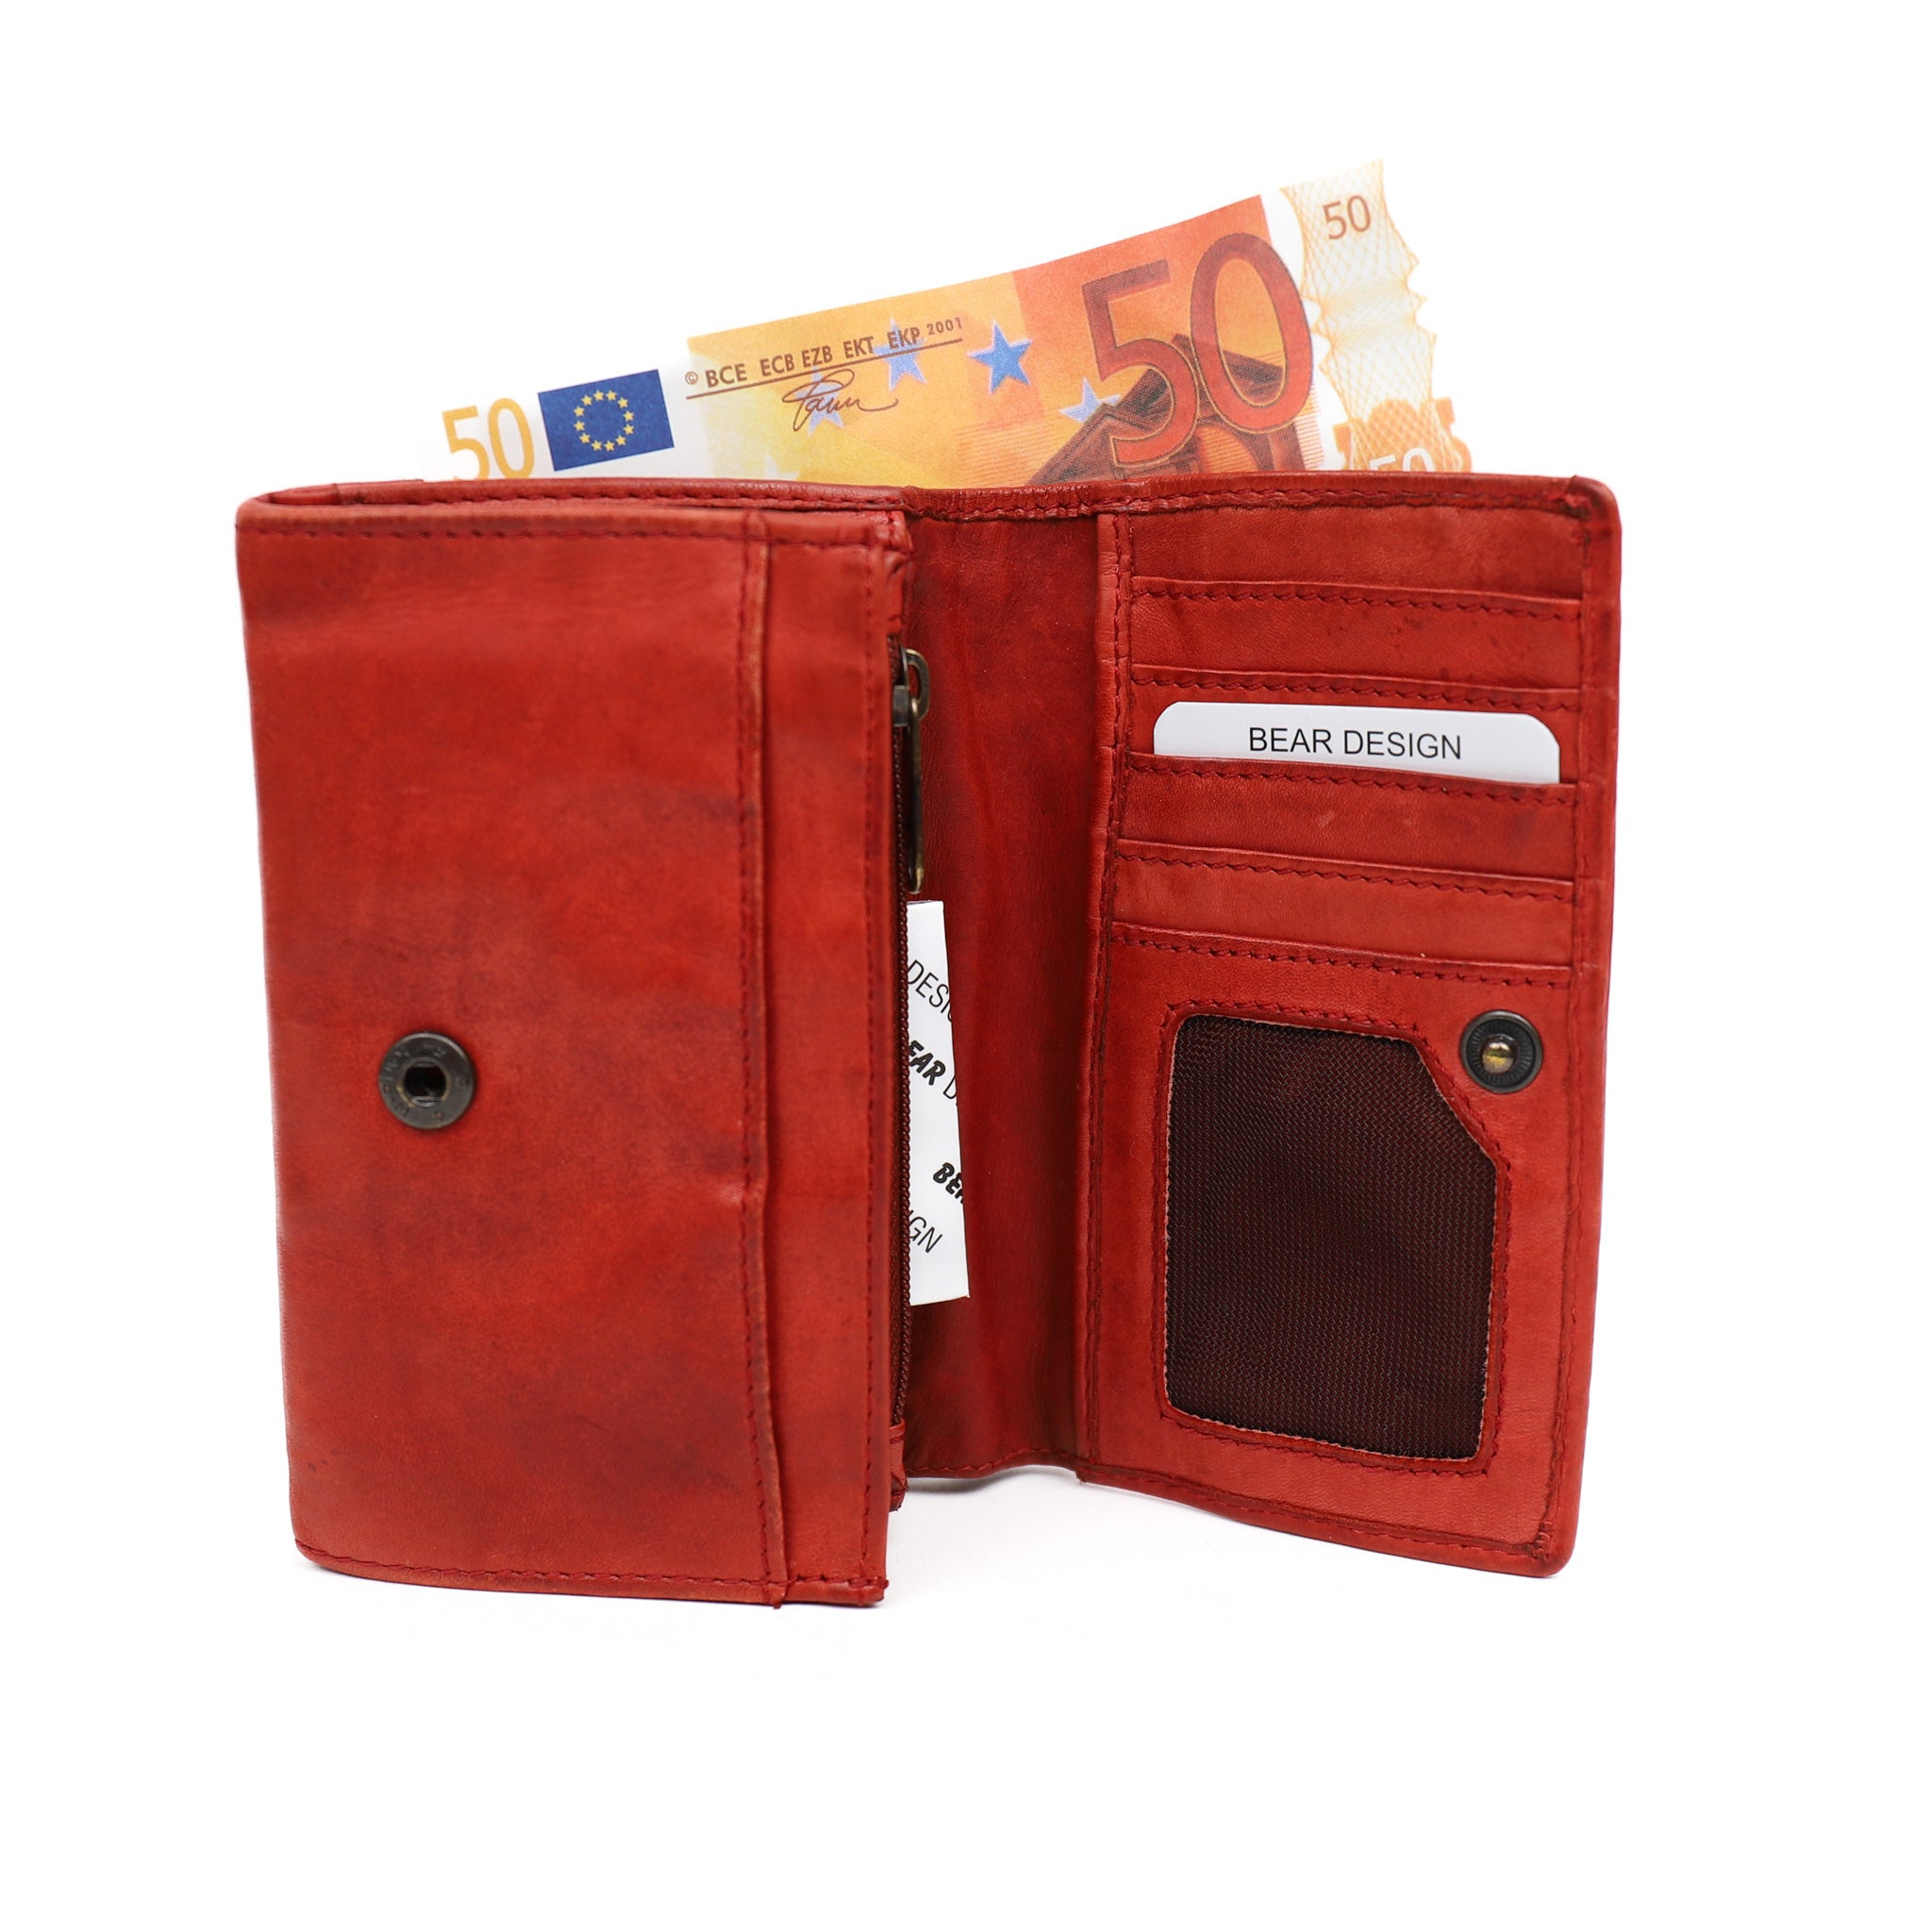 Wrap wallet 'Flappie' red - CL 15572